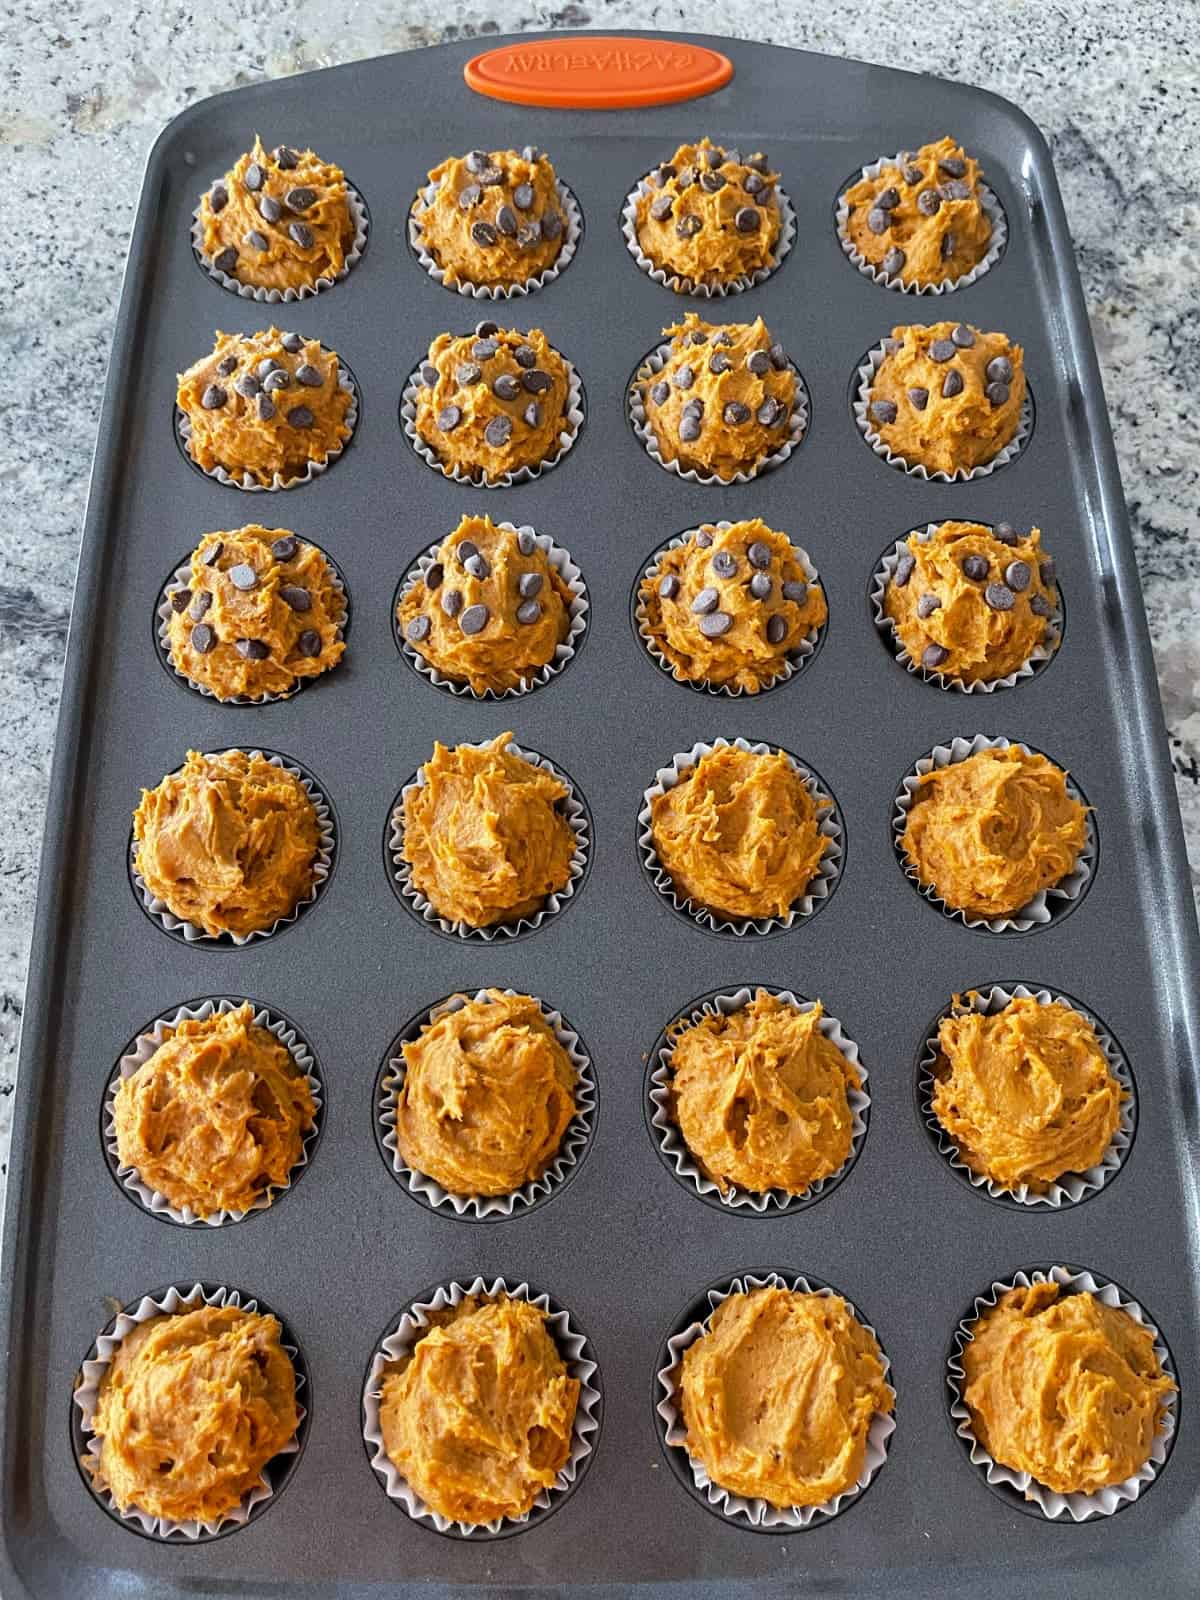 Mini muffin tin with unbaked pumpkin spice cake mix muffins - half plain and half topped with miniature chocolate chips.